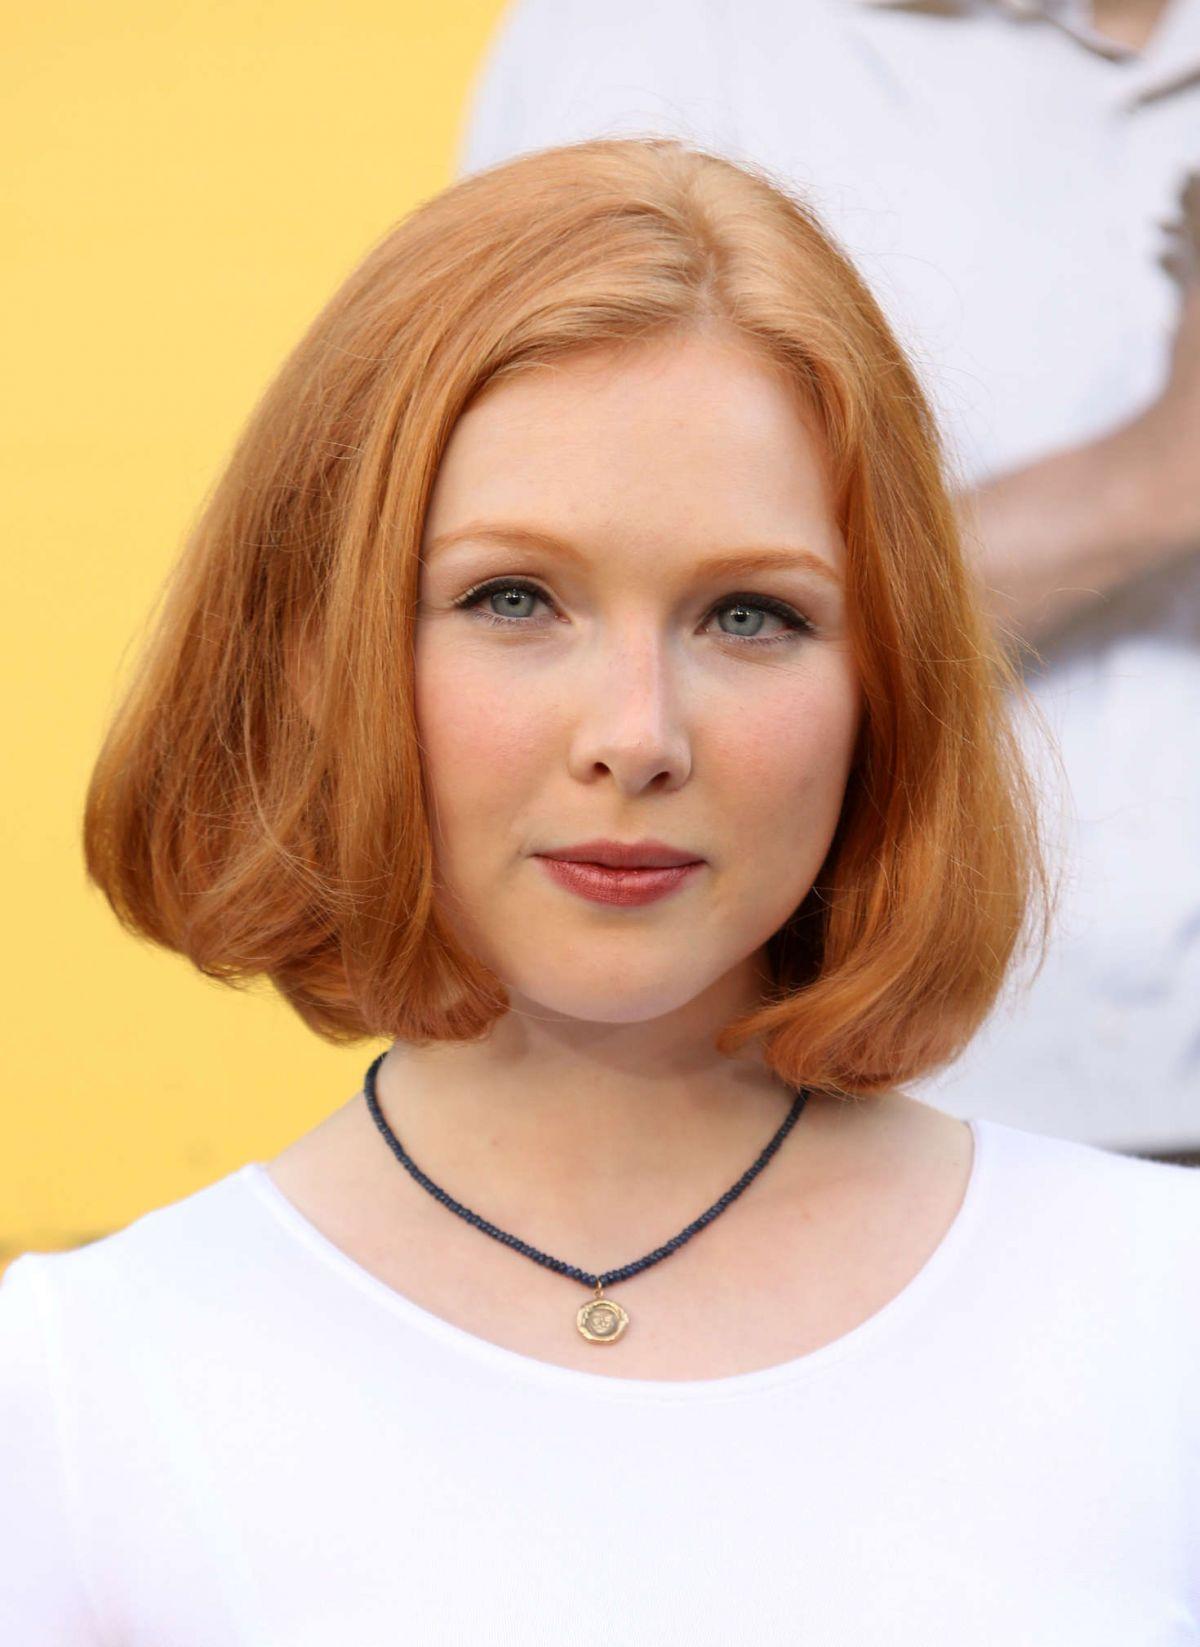 70+ Hot Pictures Of Molly C. Quinn Are God’s Gift For Her Die Hard Fans 136